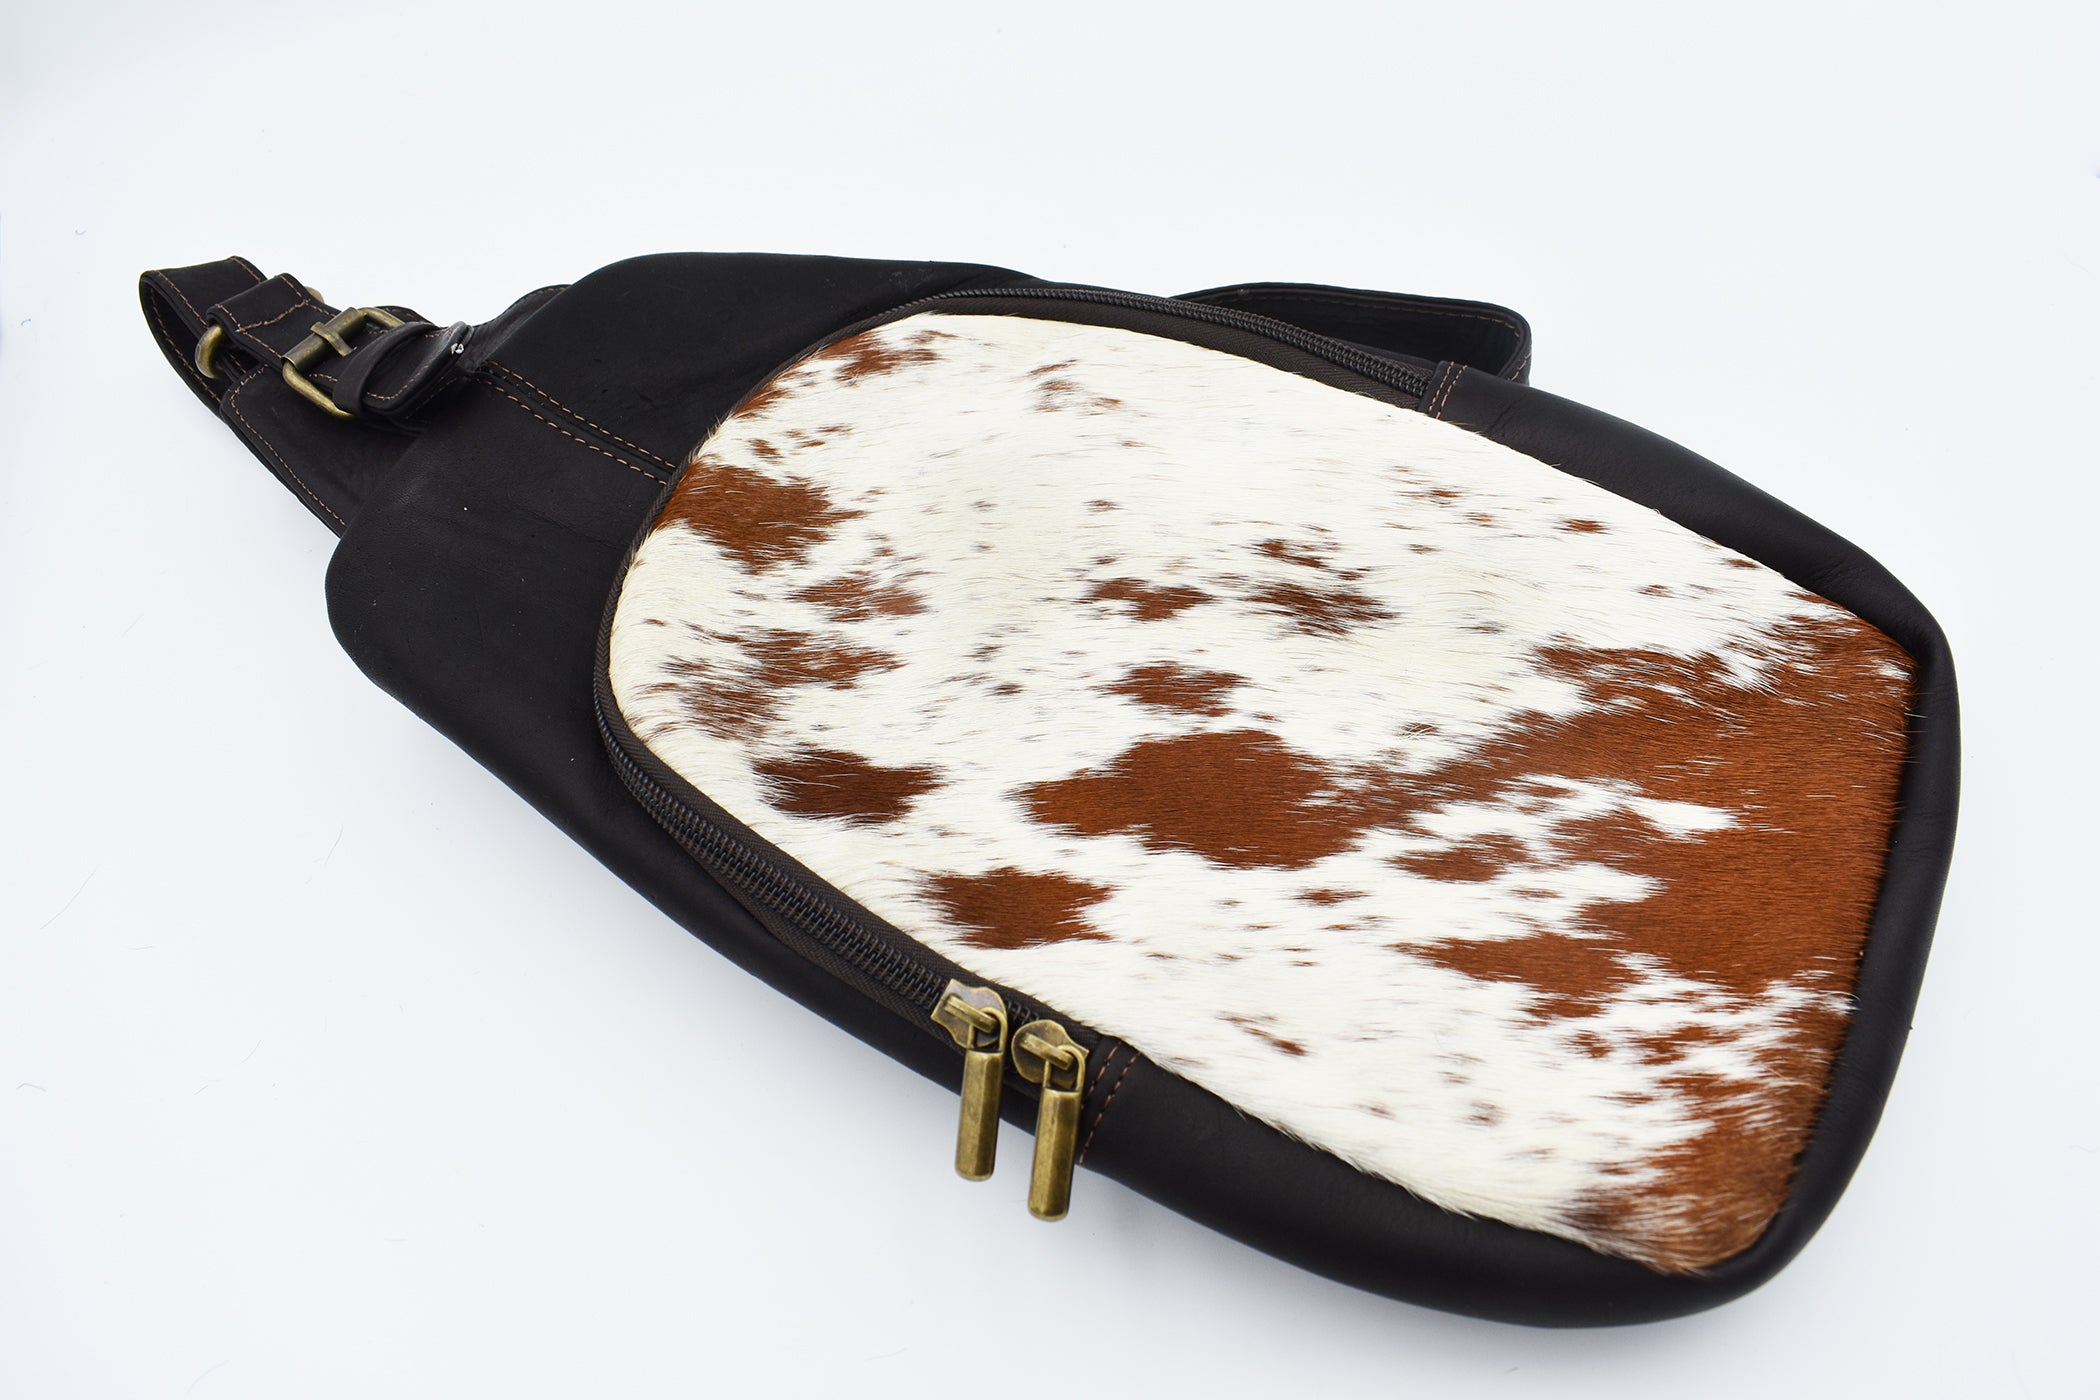 Sling, Off Shoulder Italian Leather with Brown and White  Spotted Cowhide Bag